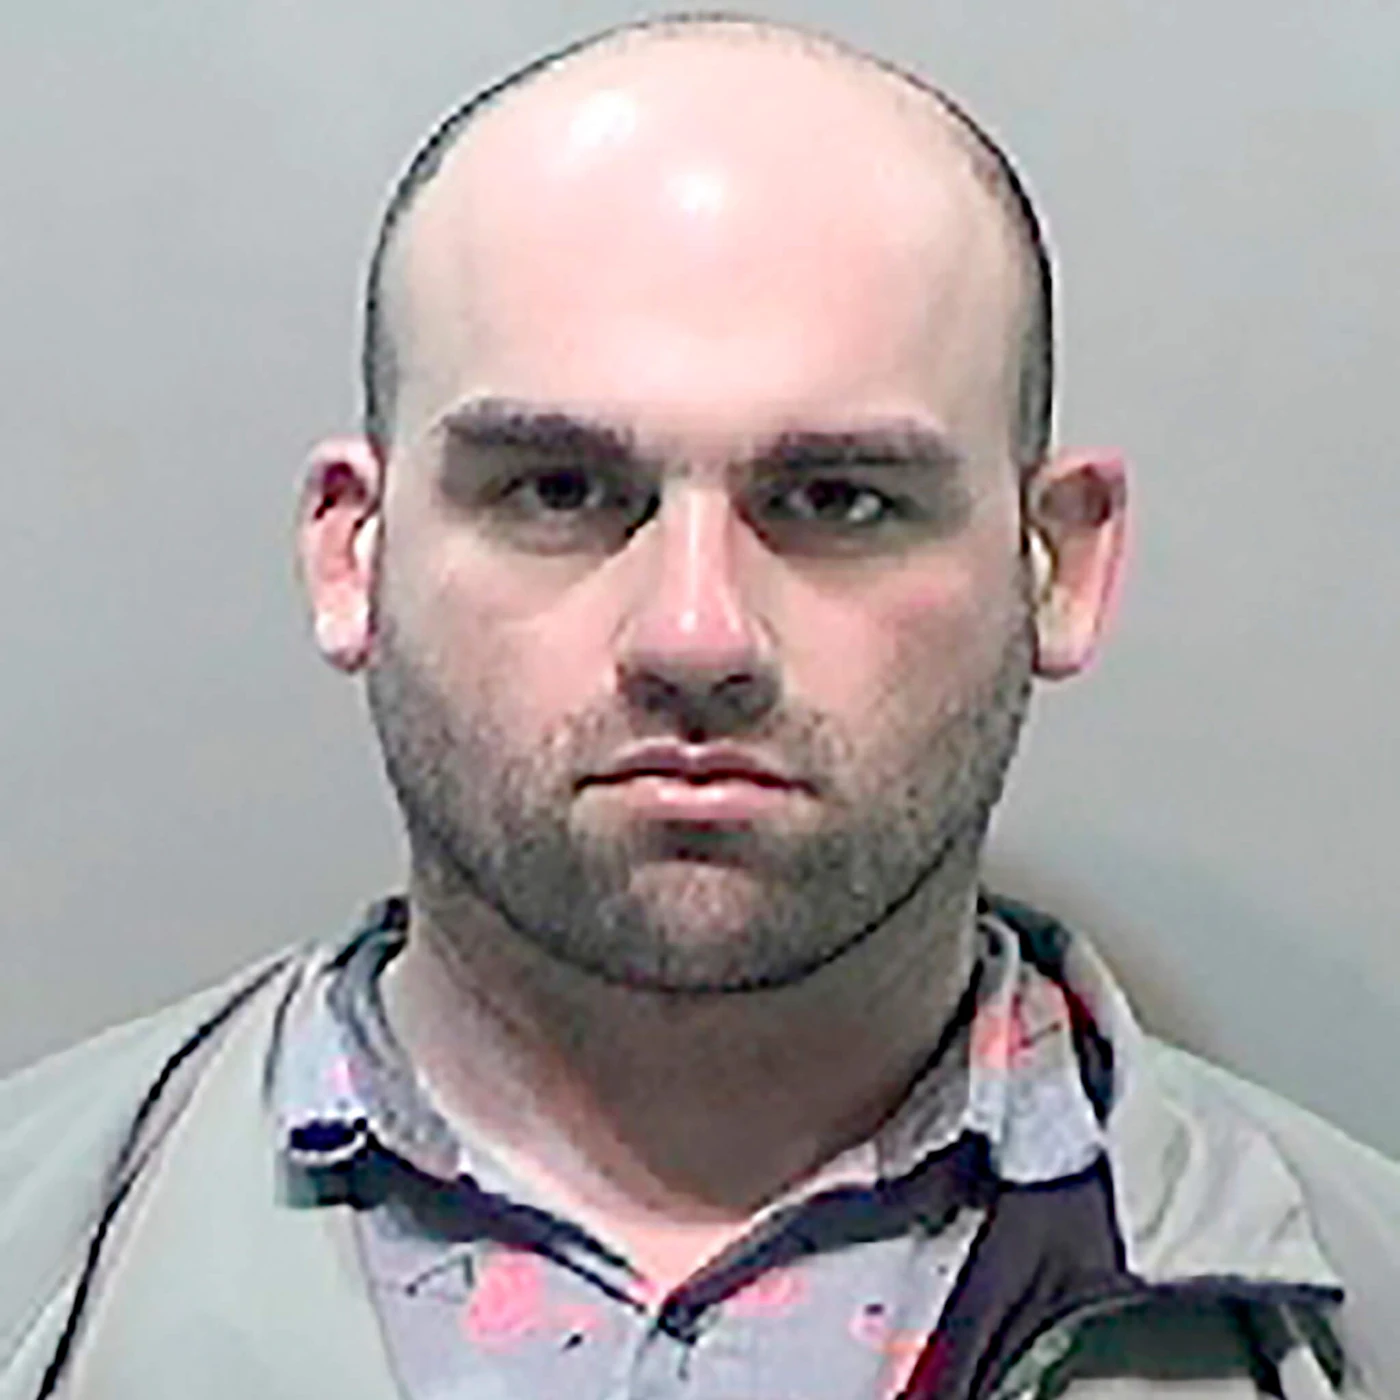 This undated booking photo provided by the Detroit Police Public Safety Office shows Robert Tesh, 32, who has been charged with terrorism for making credible death threats against Michigan Gov. Gretchen Whitmer and Attorney General Dana Nessel. Wayne County prosecutor Kym Worthy said Friday, May 15, 2020, that Tesh made the threats via social media to an acquaintance on April 14.  (Detroit Police Public Safety Office via AP)